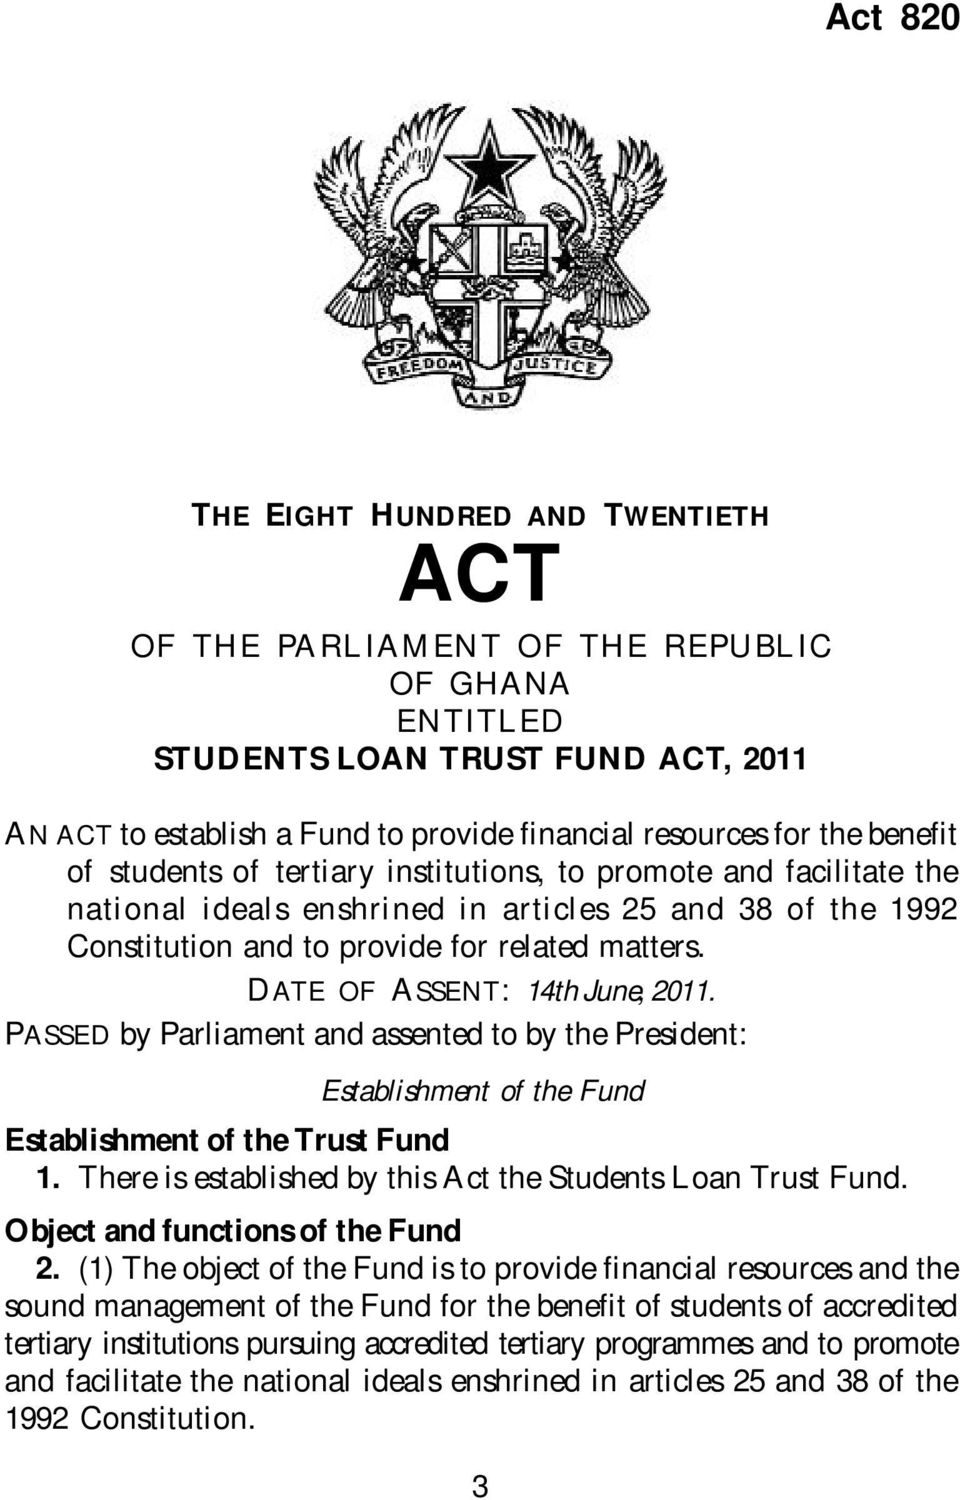 for related matters. DATE OF ASSENT: 14th June, 2011. PASSED by Parliament and assented to by the President: Establishment of the Fund Establishment of the Trust Fund 1.